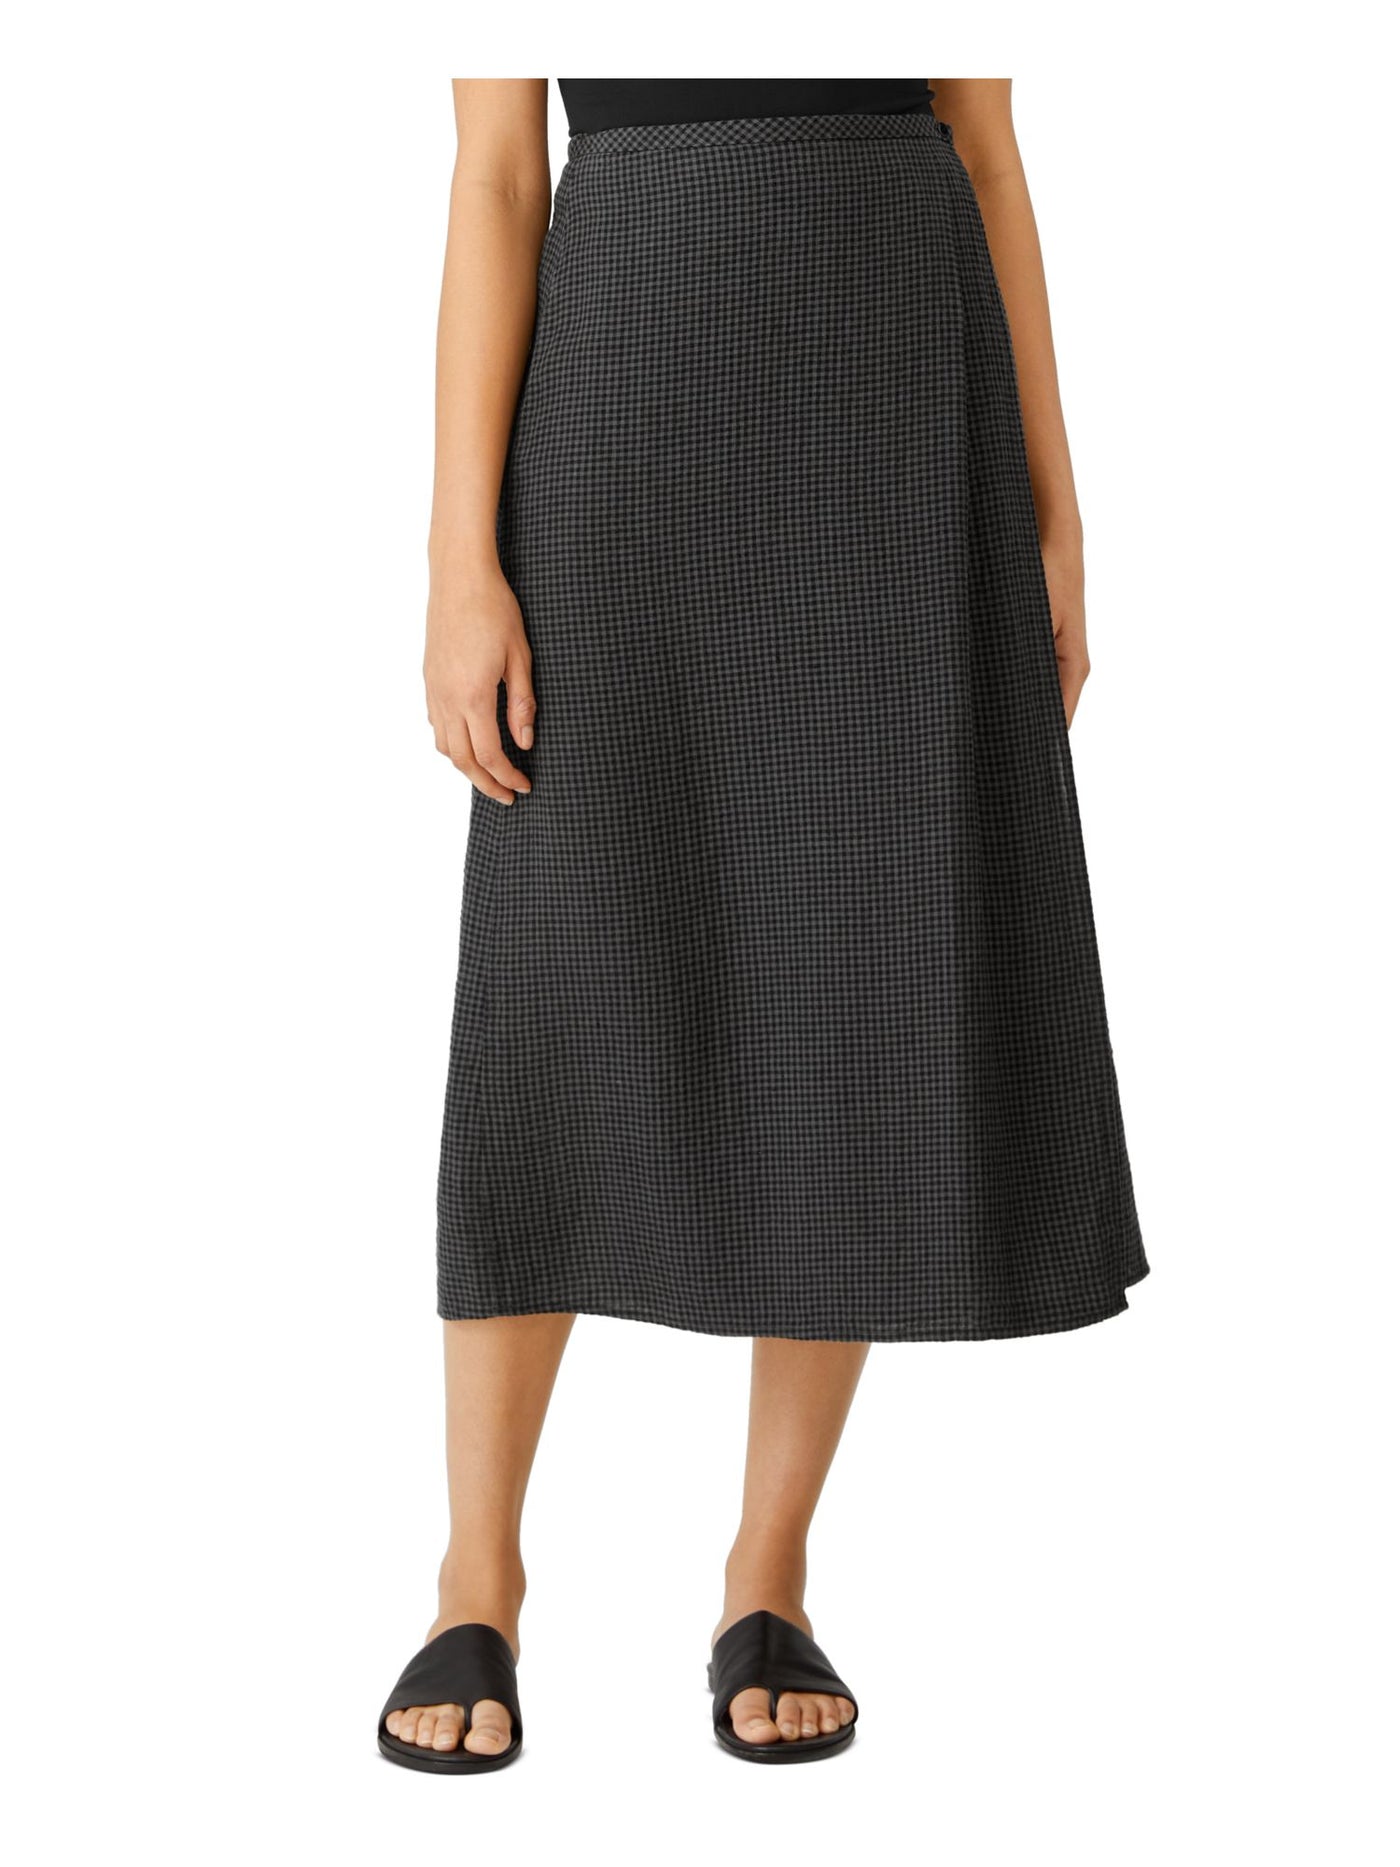 EILEEN FISHER Womens Black Sheer Unlined Button Closure Pleated Check Midi Wrap Skirt L